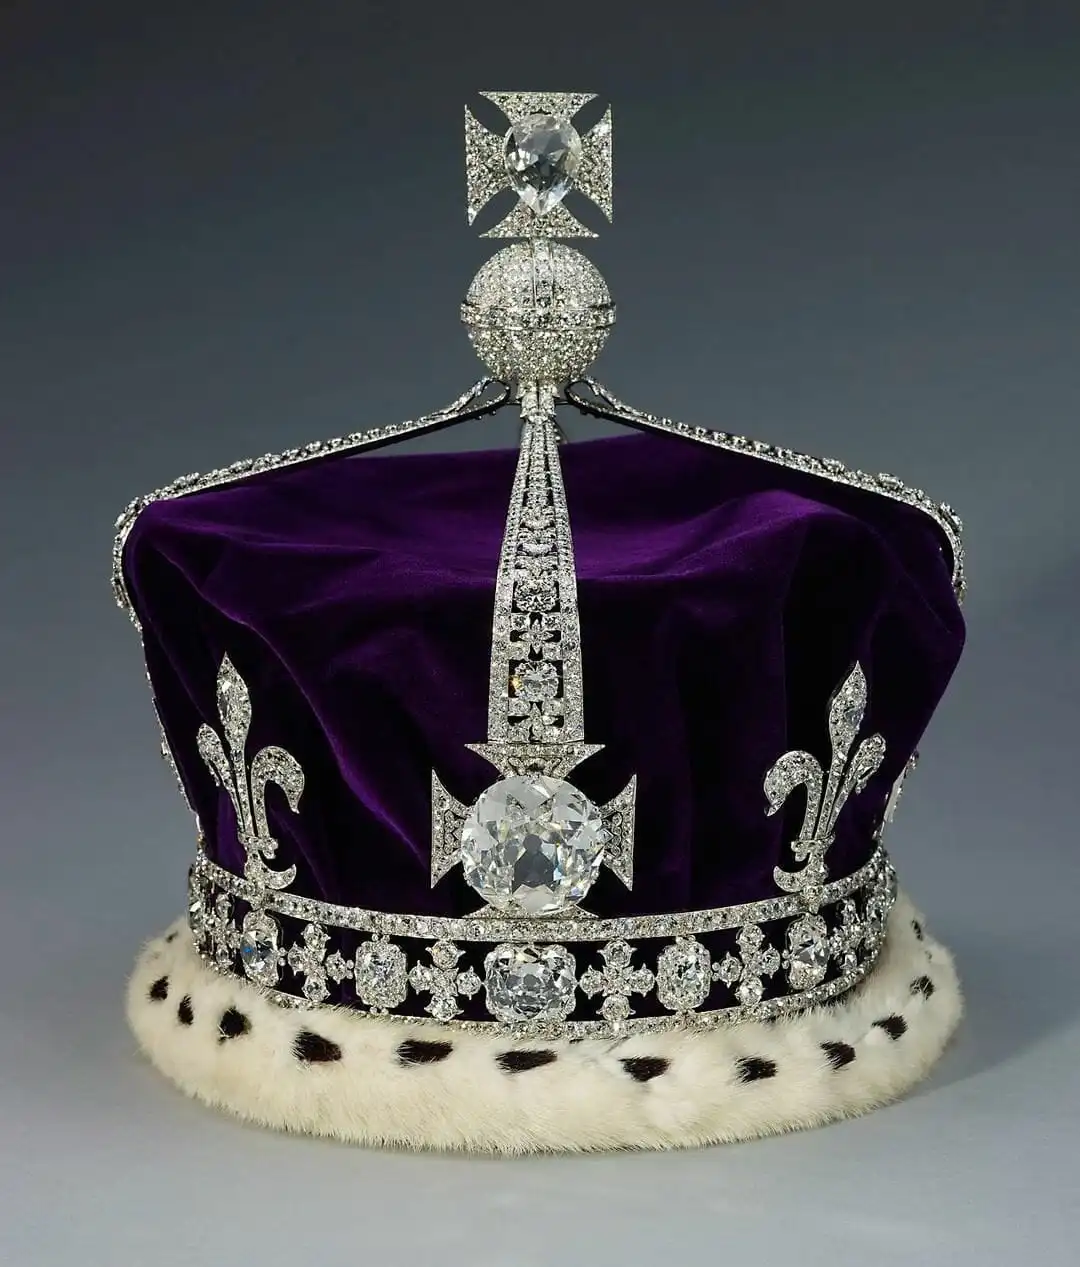 The Fight Greater Than Just A Gem: The History of the Kohinoor Diamond –  The Science Survey